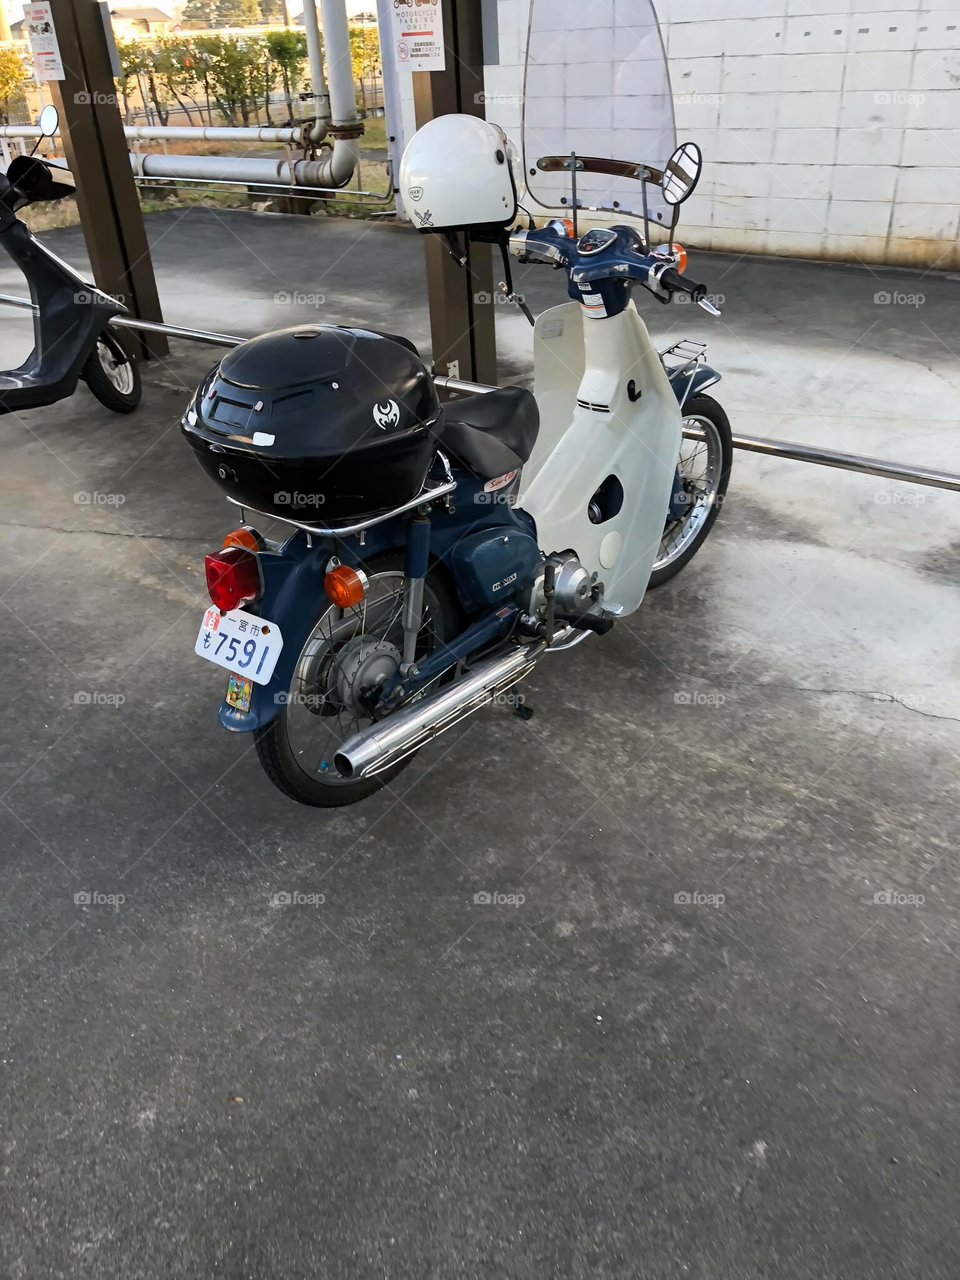 Japanese Bike, commonly called duck! a naughty old duck 🦆